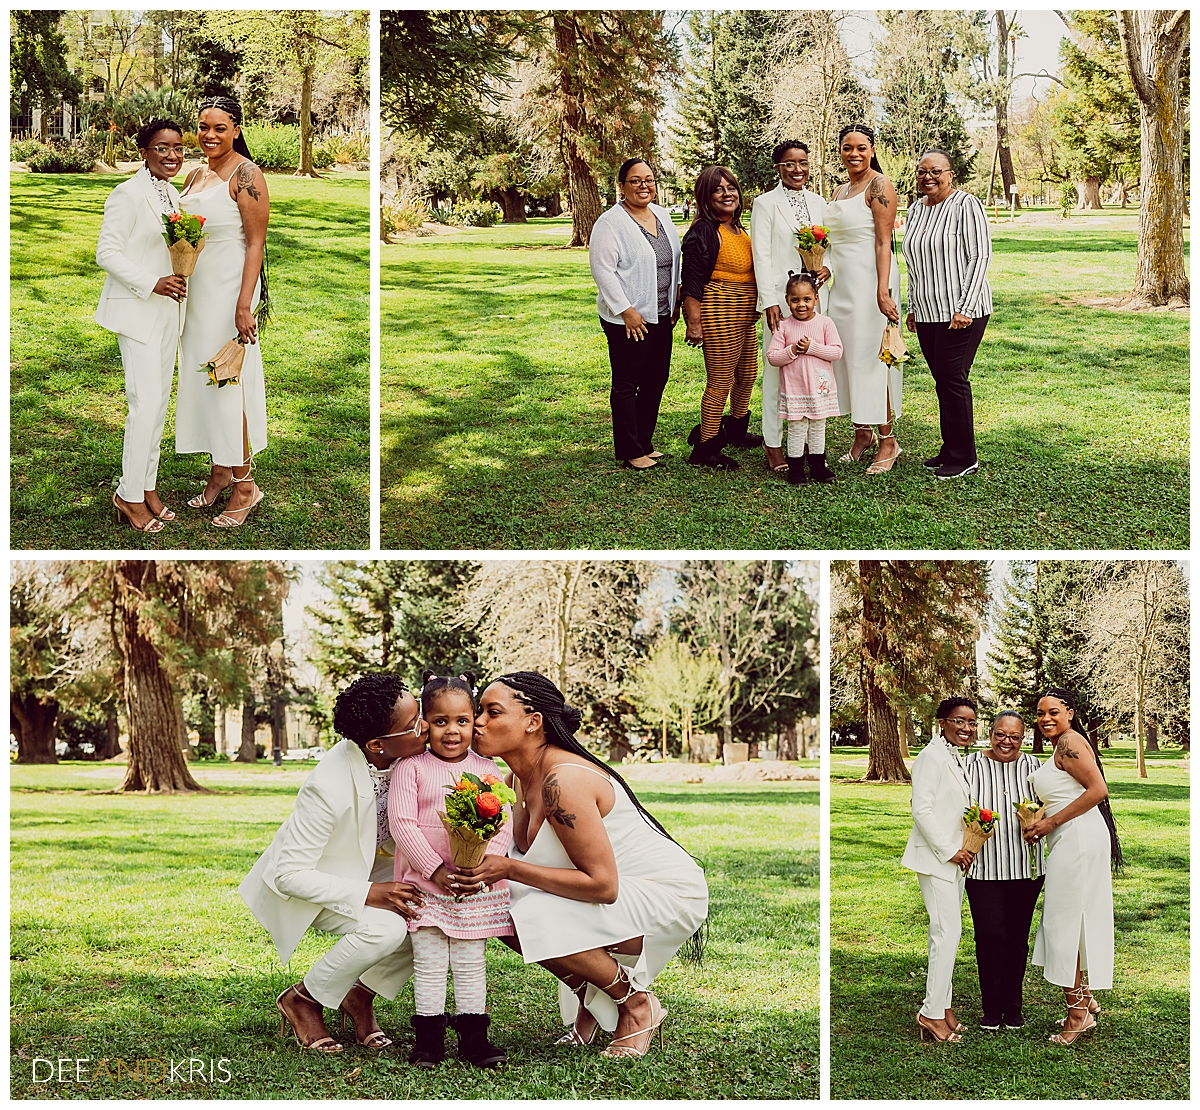 Four images: Top left image of couple standing together holding bouquet. Top right image of couple standing with four guests; three adults and one child. Bottom left image of couple crouching to kiss child on cheeks. Bottom right image of couple standing with one guest.